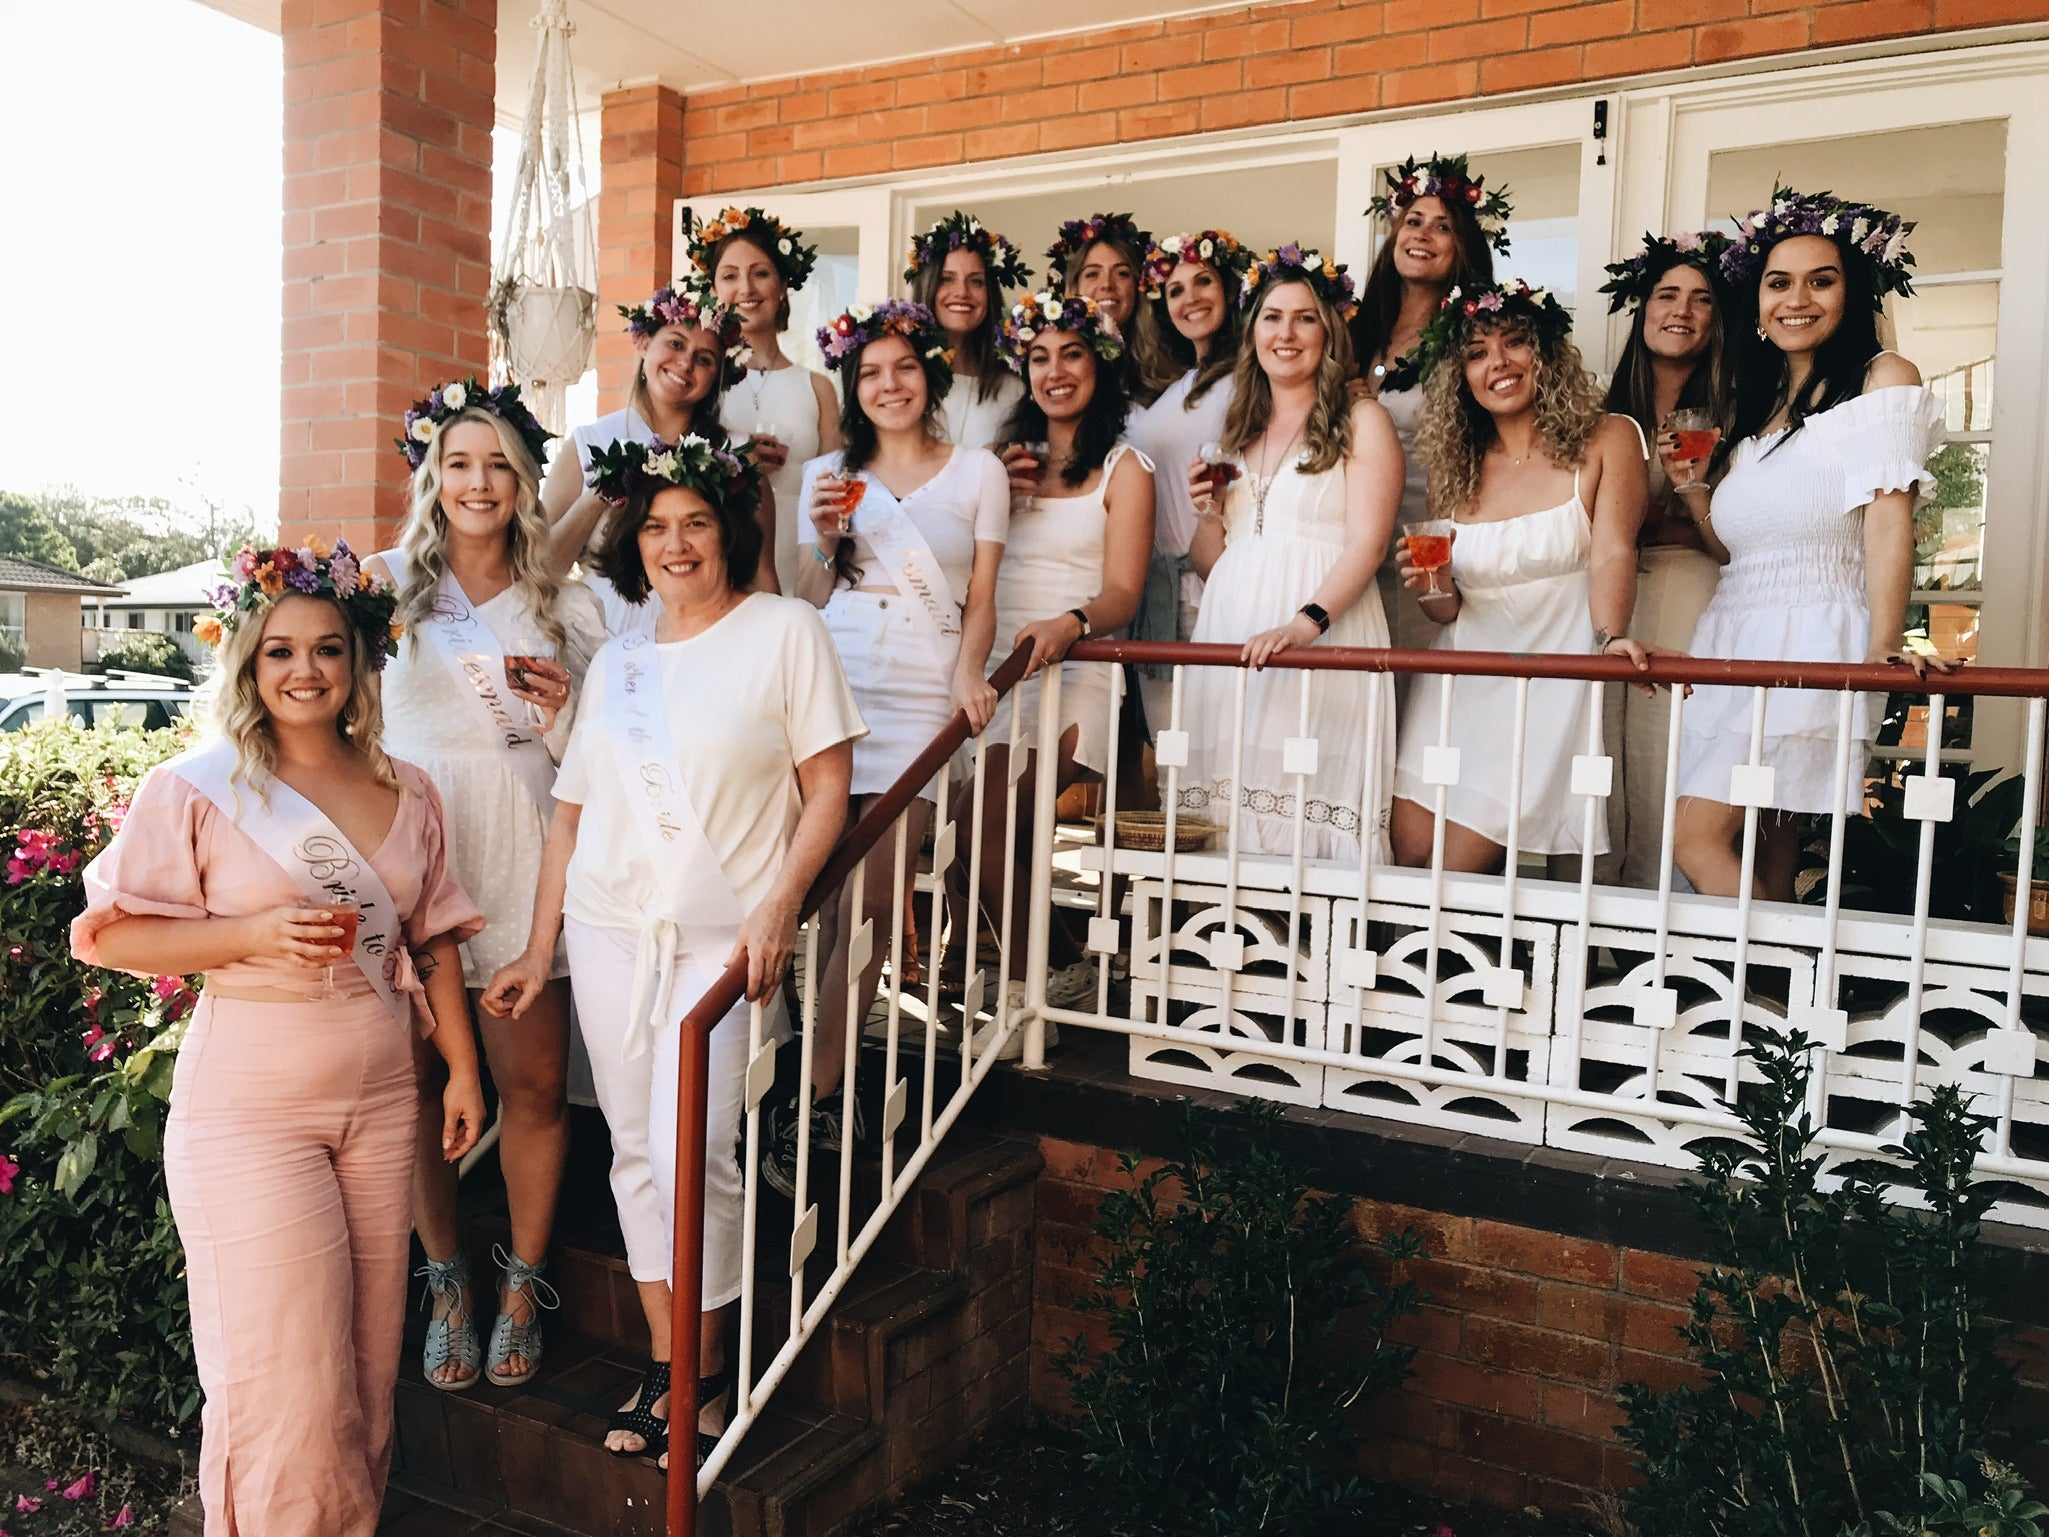 Bridal shower fun on The Craft Parlour steps